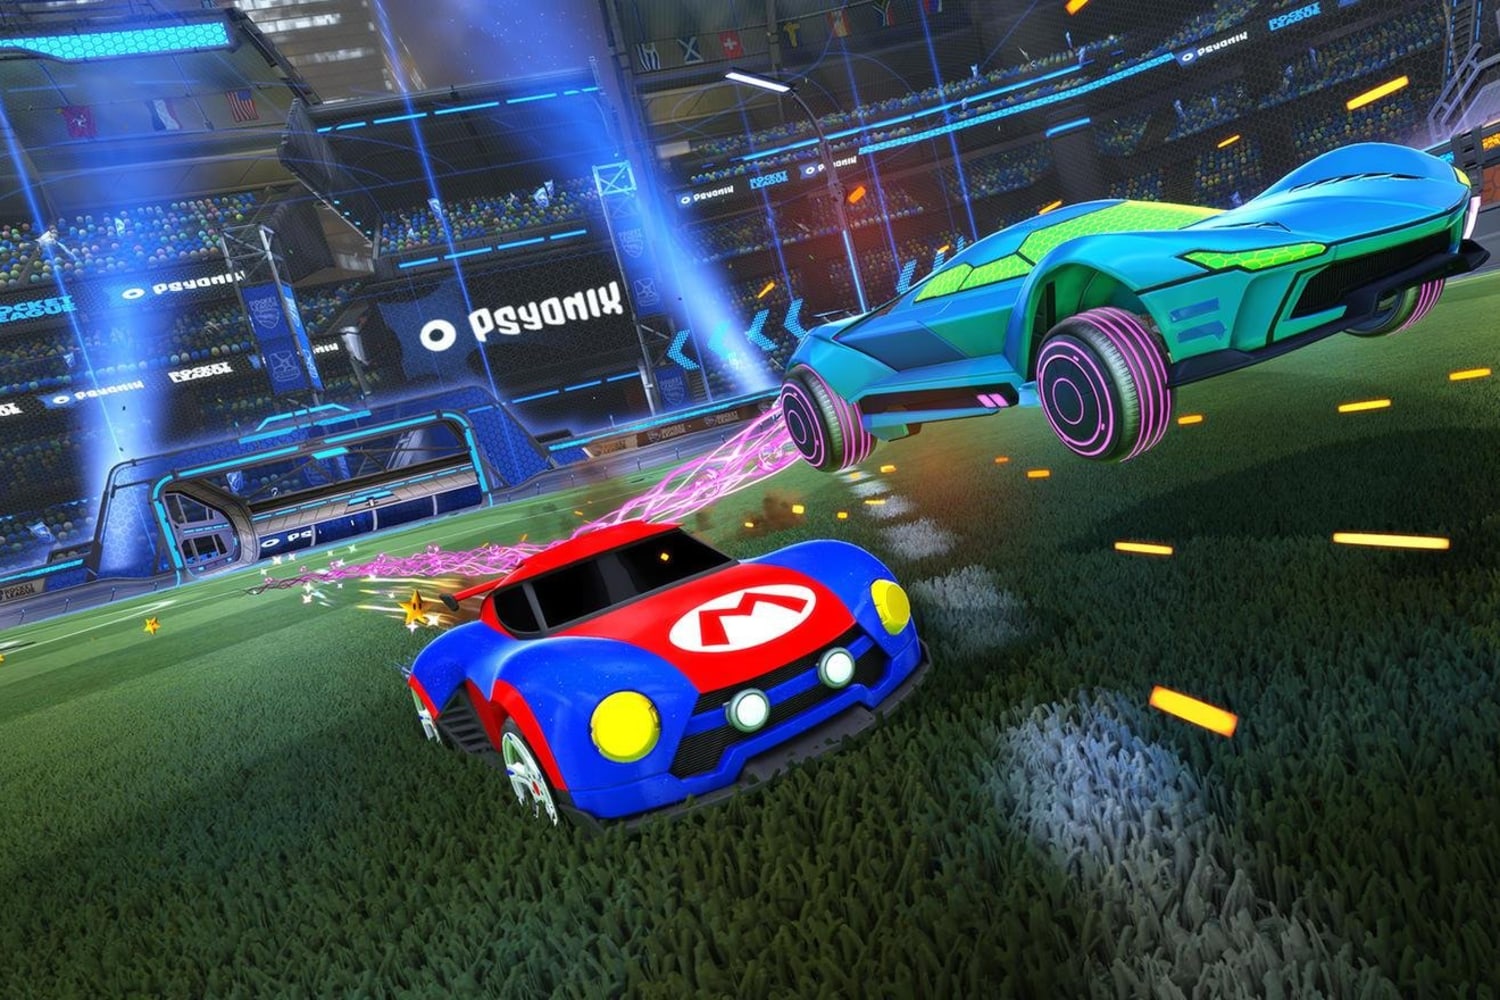 can you get rocket league on nintendo switch